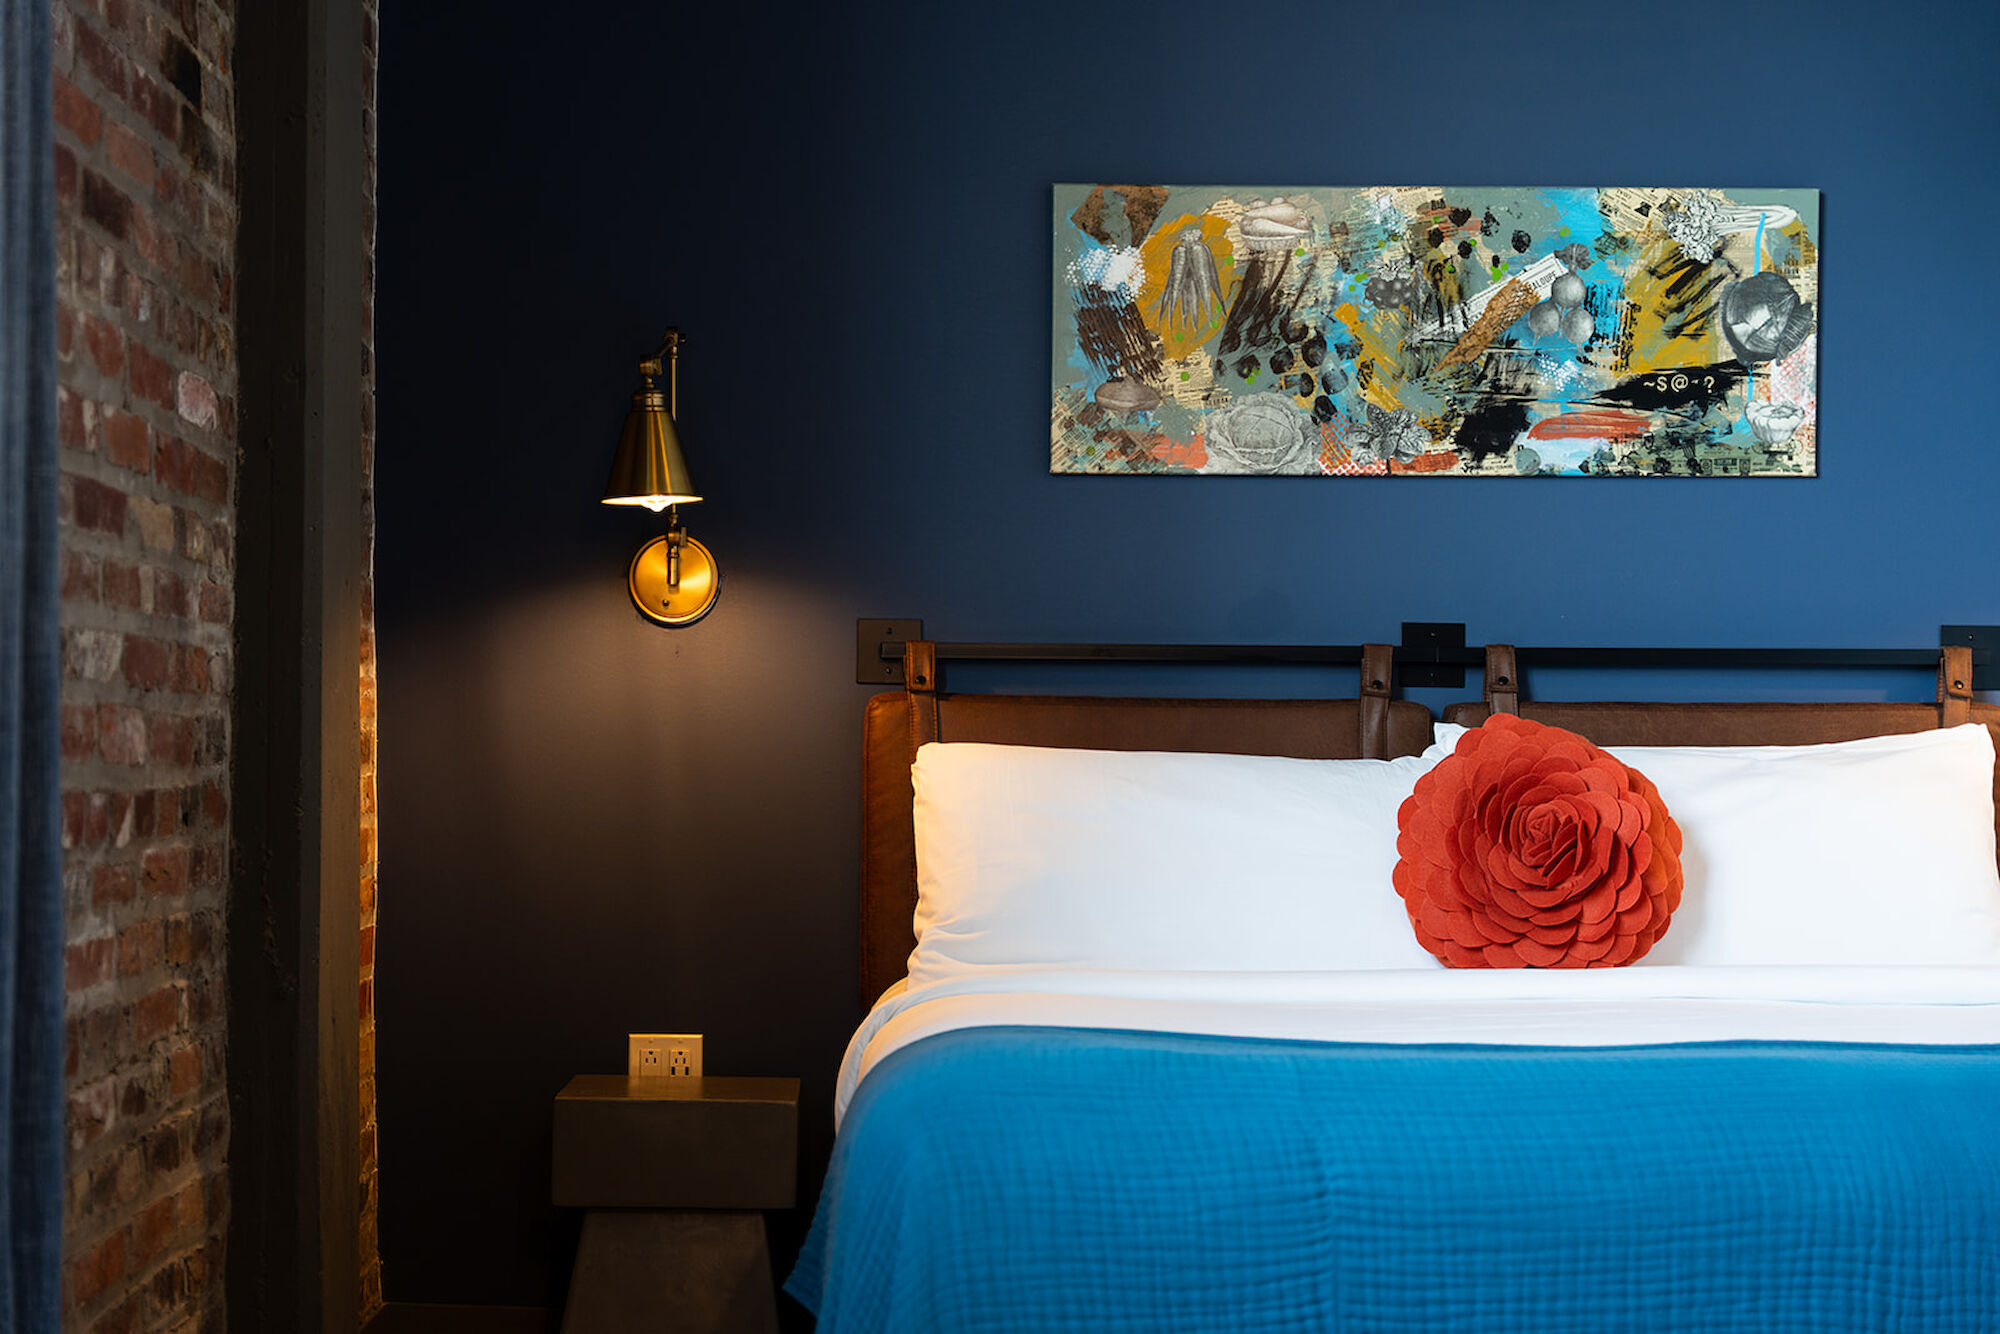 A cozy bedroom with a blue wall, a bedside lamp, a bed with white linen, a blue blanket, a red round pillow, and abstract wall art.